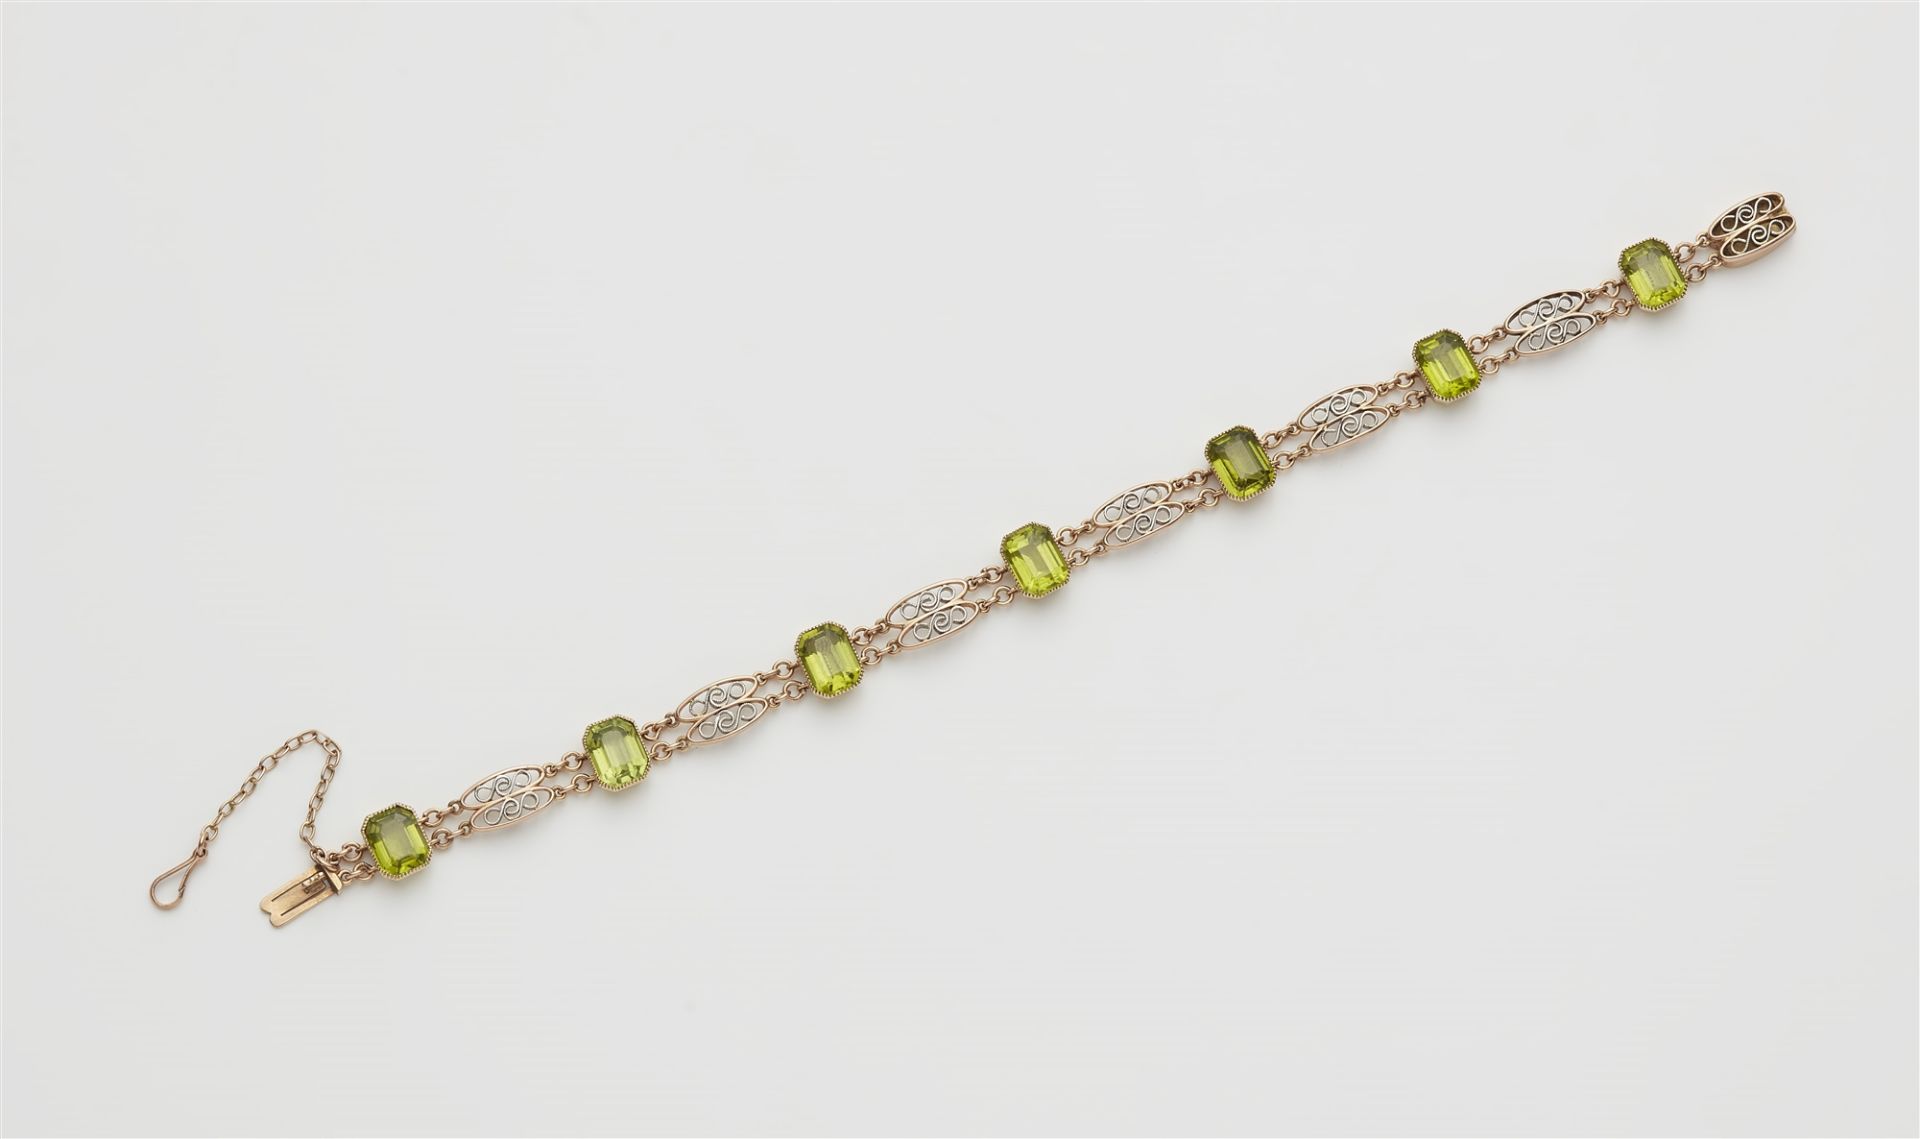 A 14k red gold platinum and peridot bracelet.